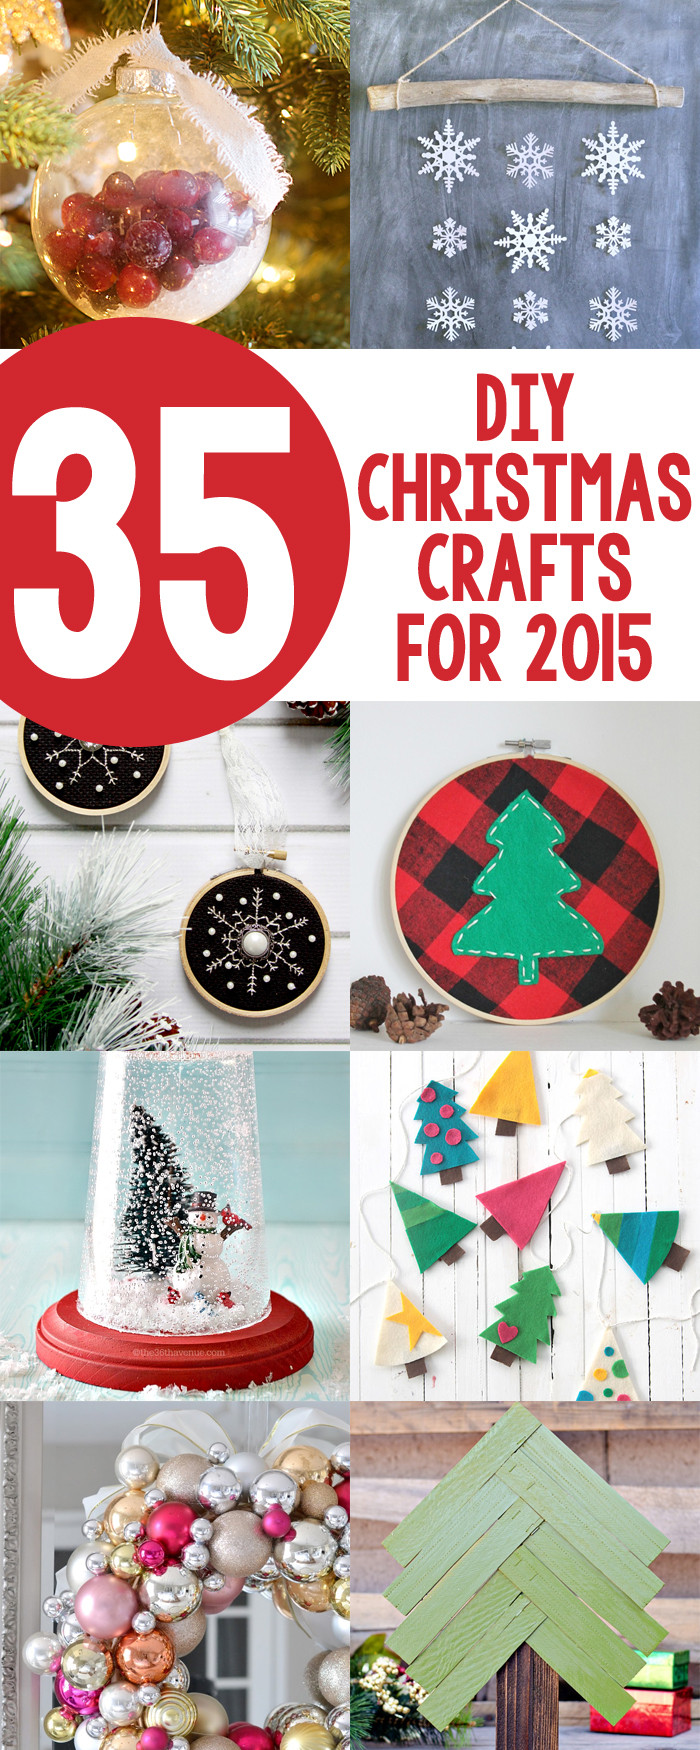 Christmas Crafts DIY
 35 DIY Christmas Crafts for 2015 Yellow Bliss Road